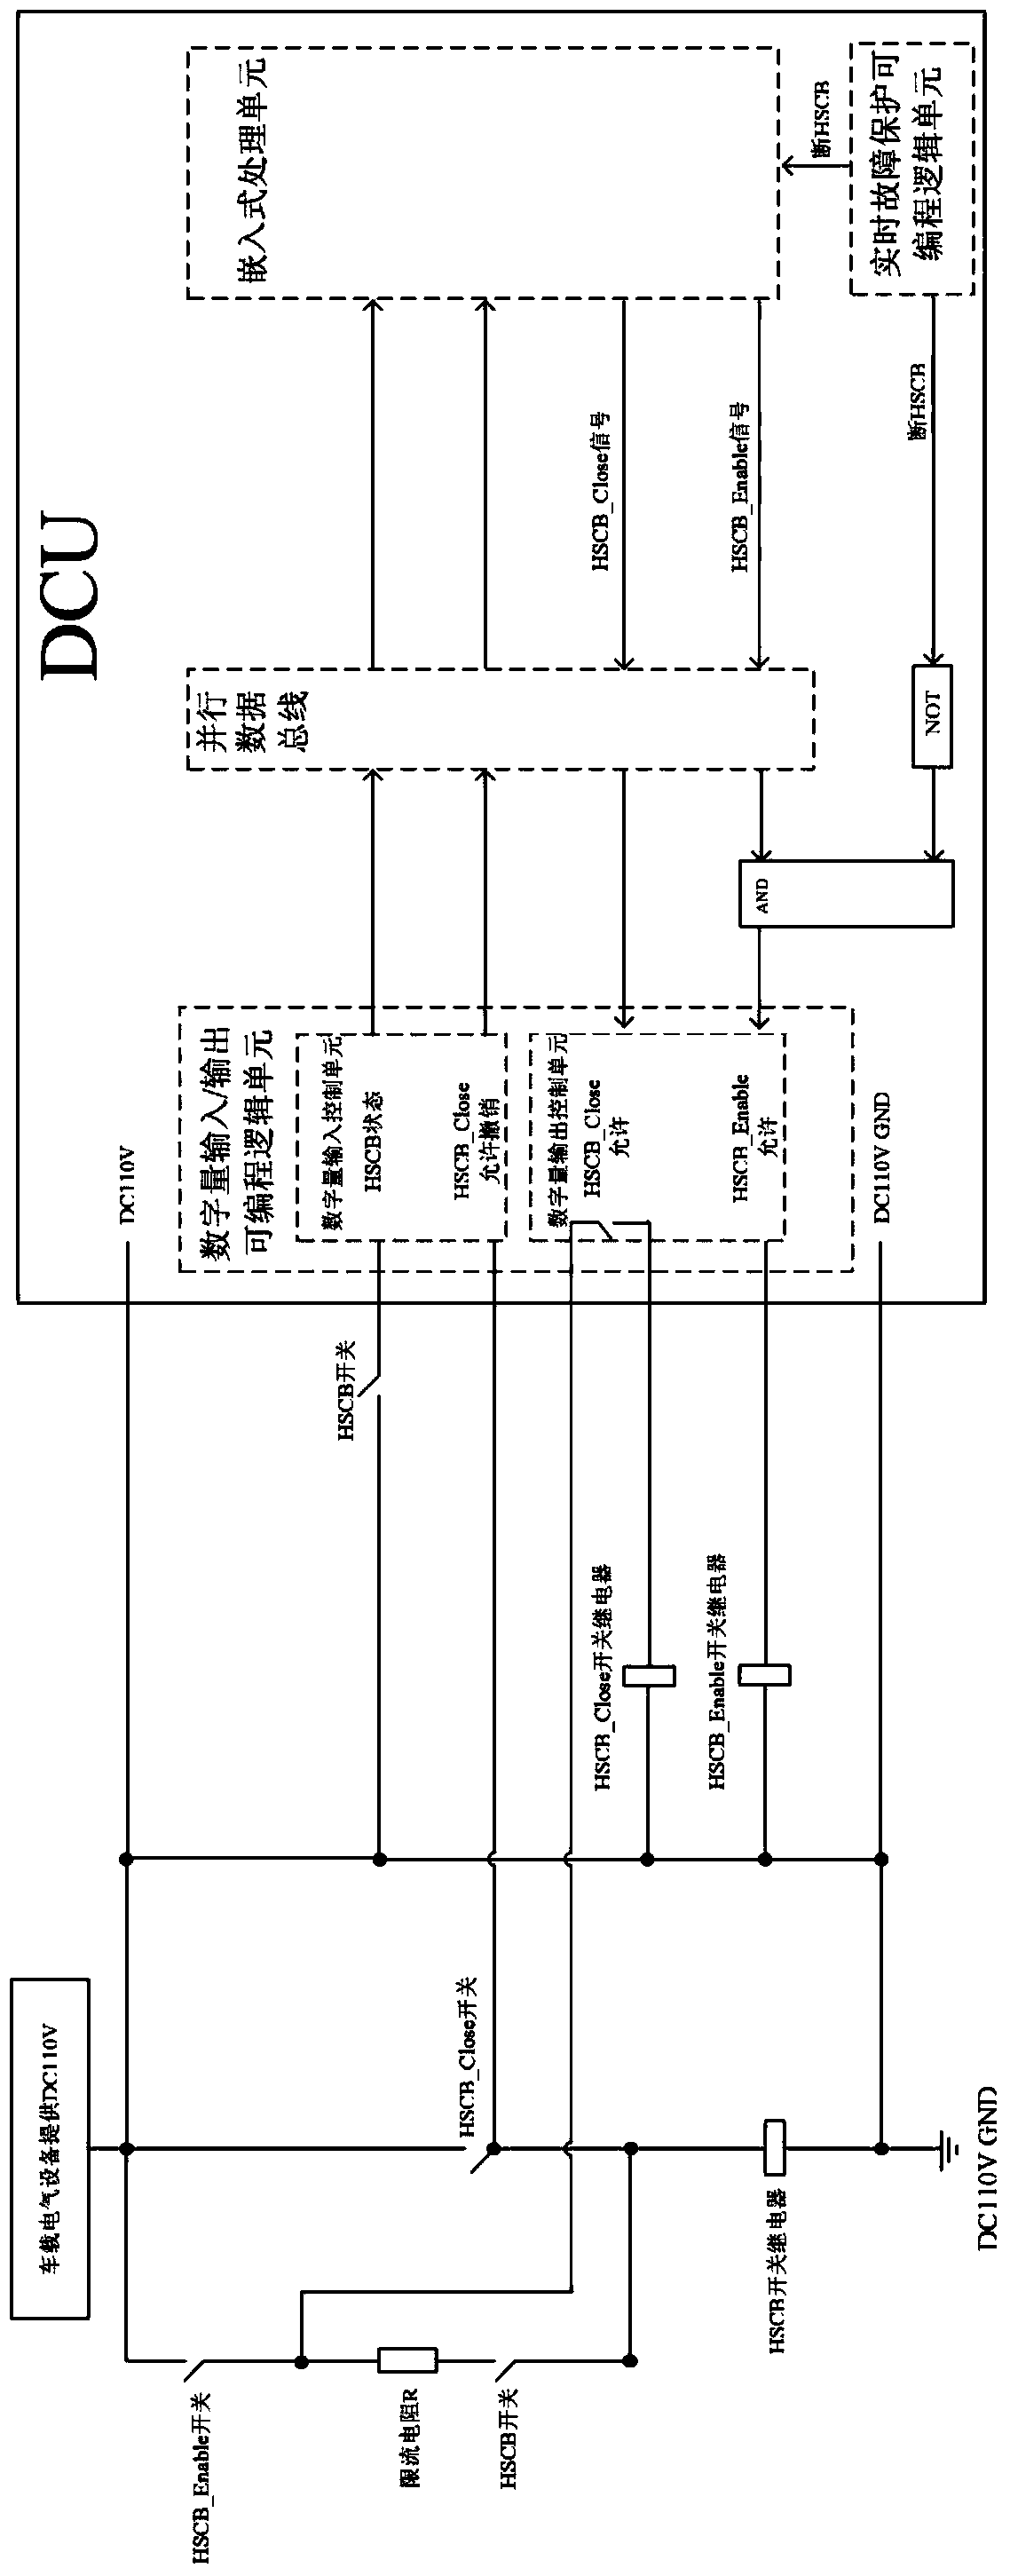 Control device and method for HSCB automatic re-operation under subway train VVVF fault work condition